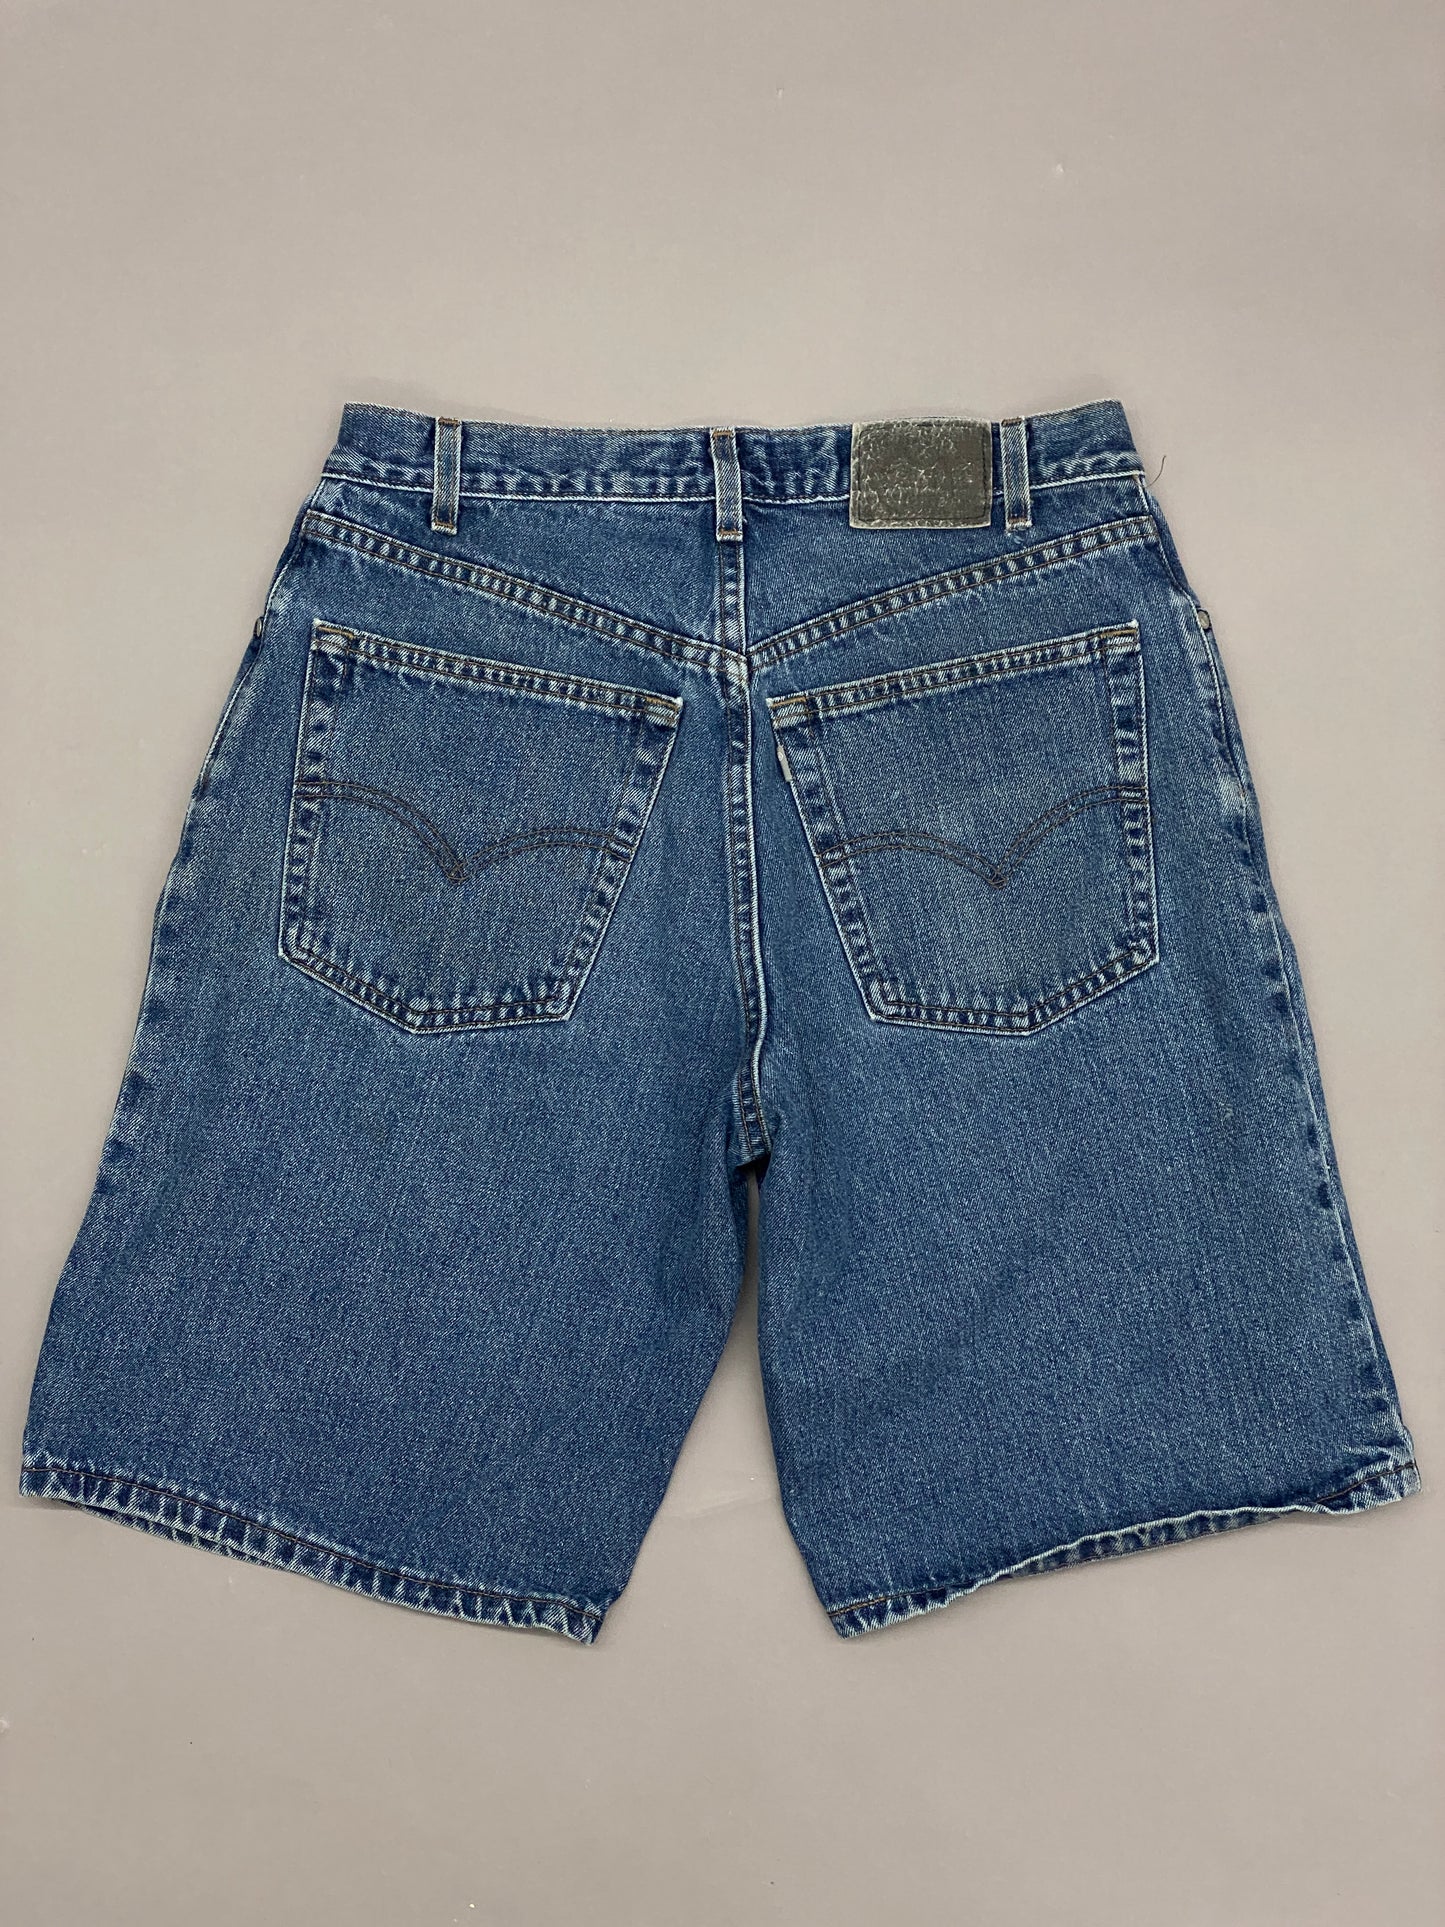 Shorts Baggy Levis Silver Tab Vintage - 33